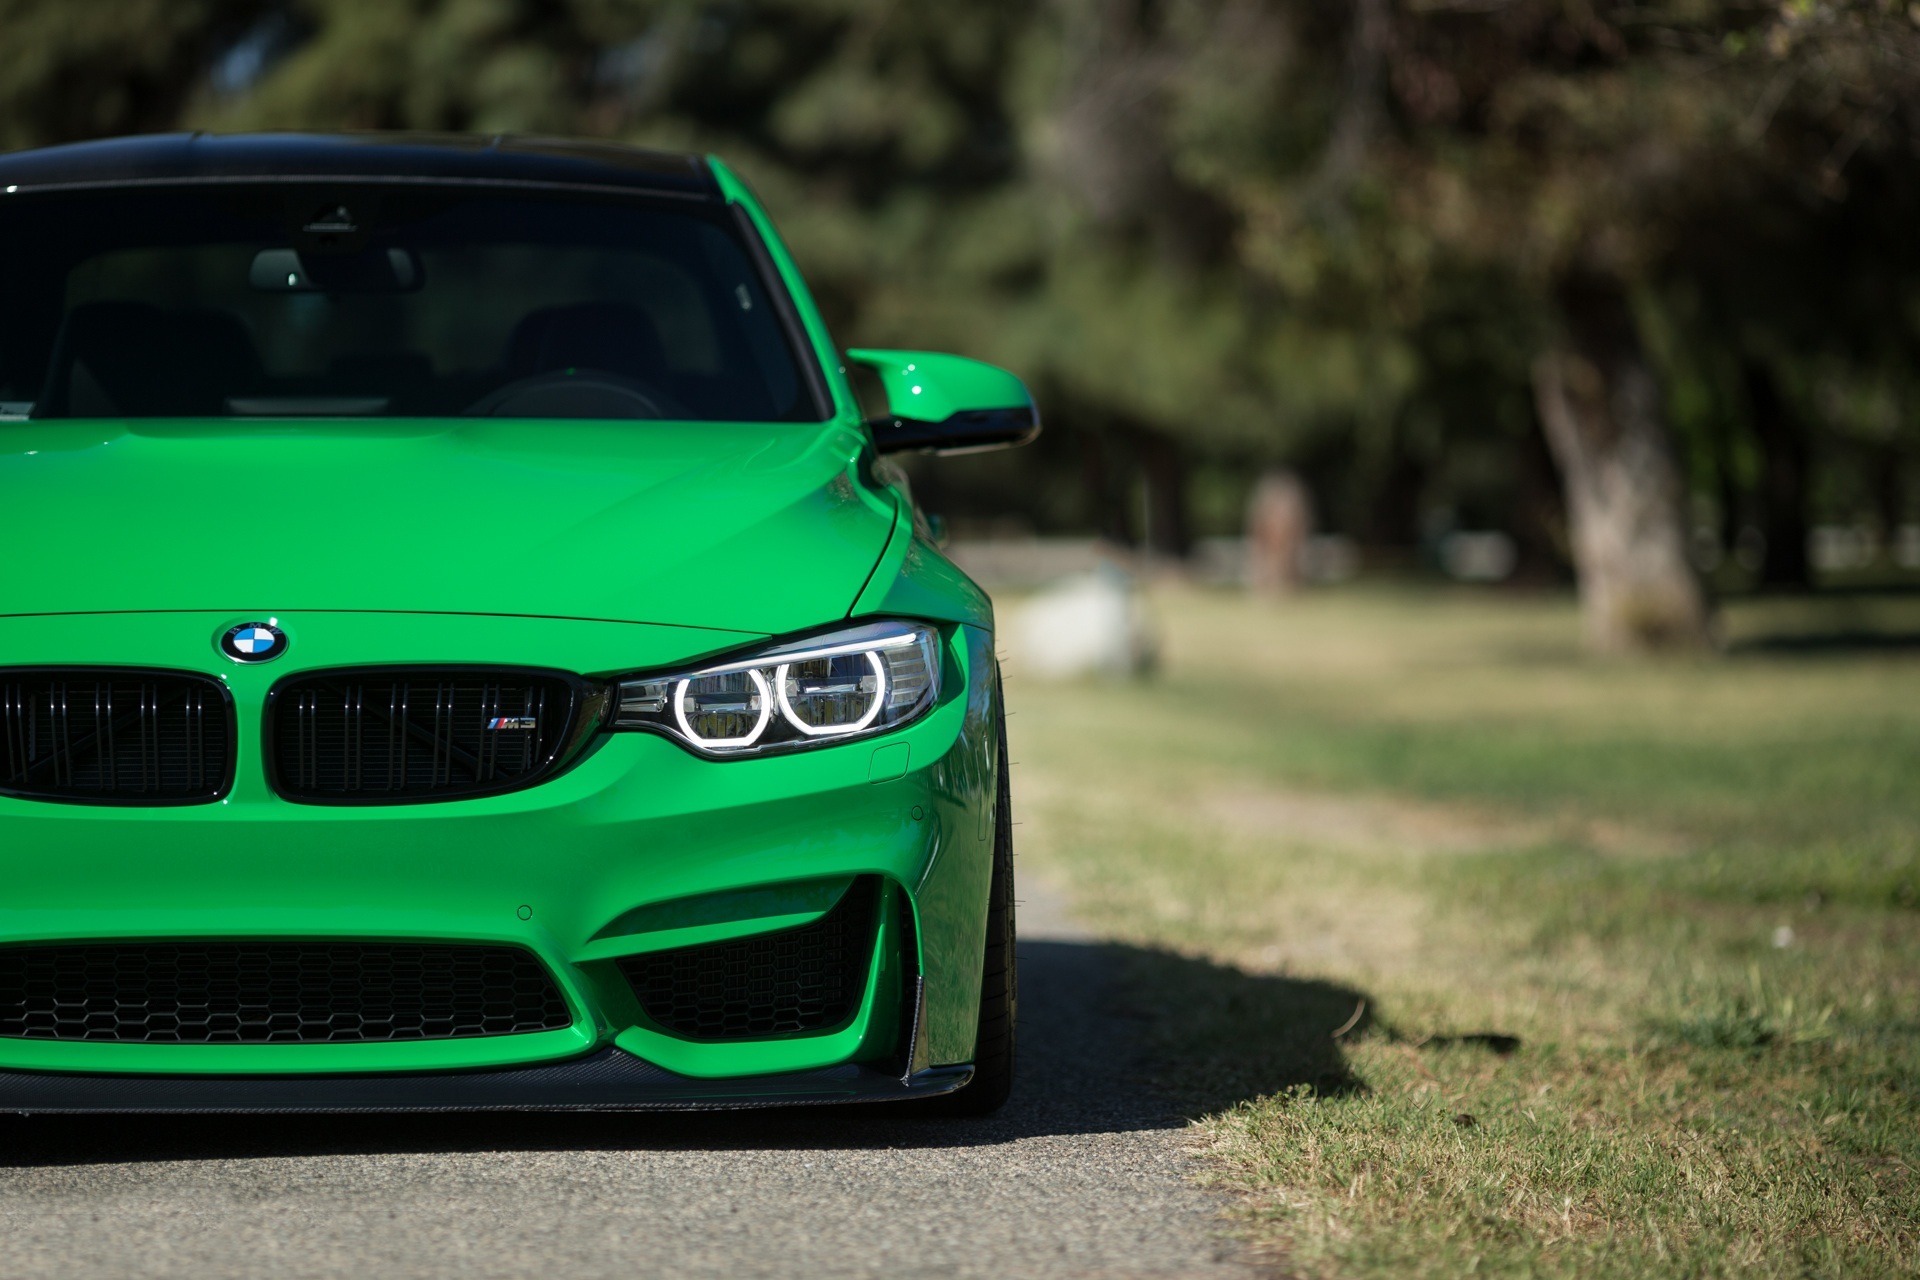 157259 free download Green wallpapers for phone, green, cars, front view, bmw, m3, 2016 Green images and screensavers for mobile